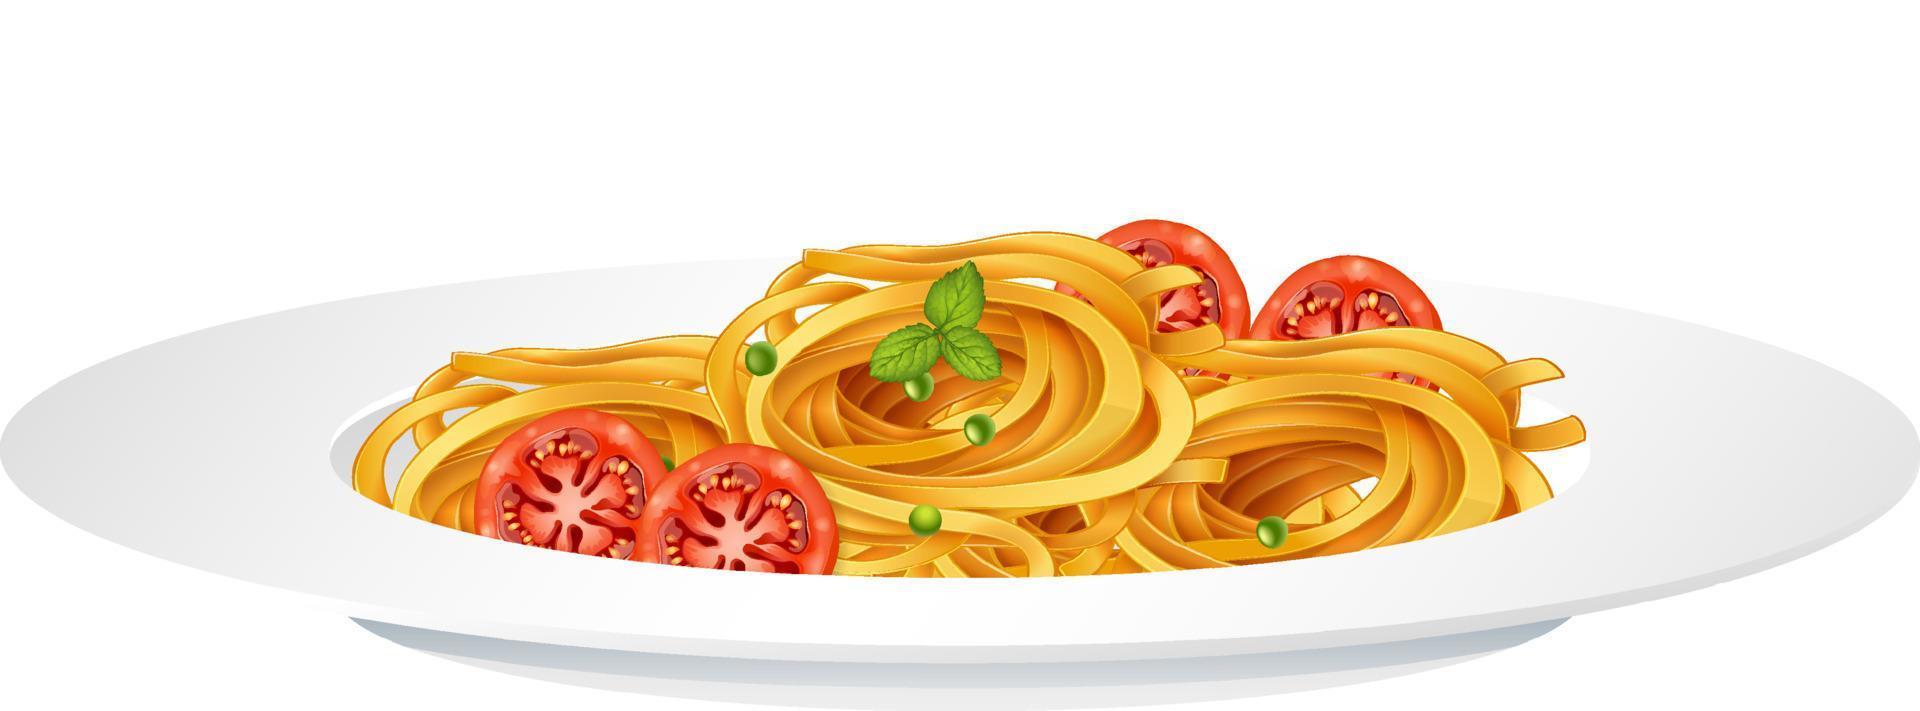 Spaghetti with tomato isolated vector